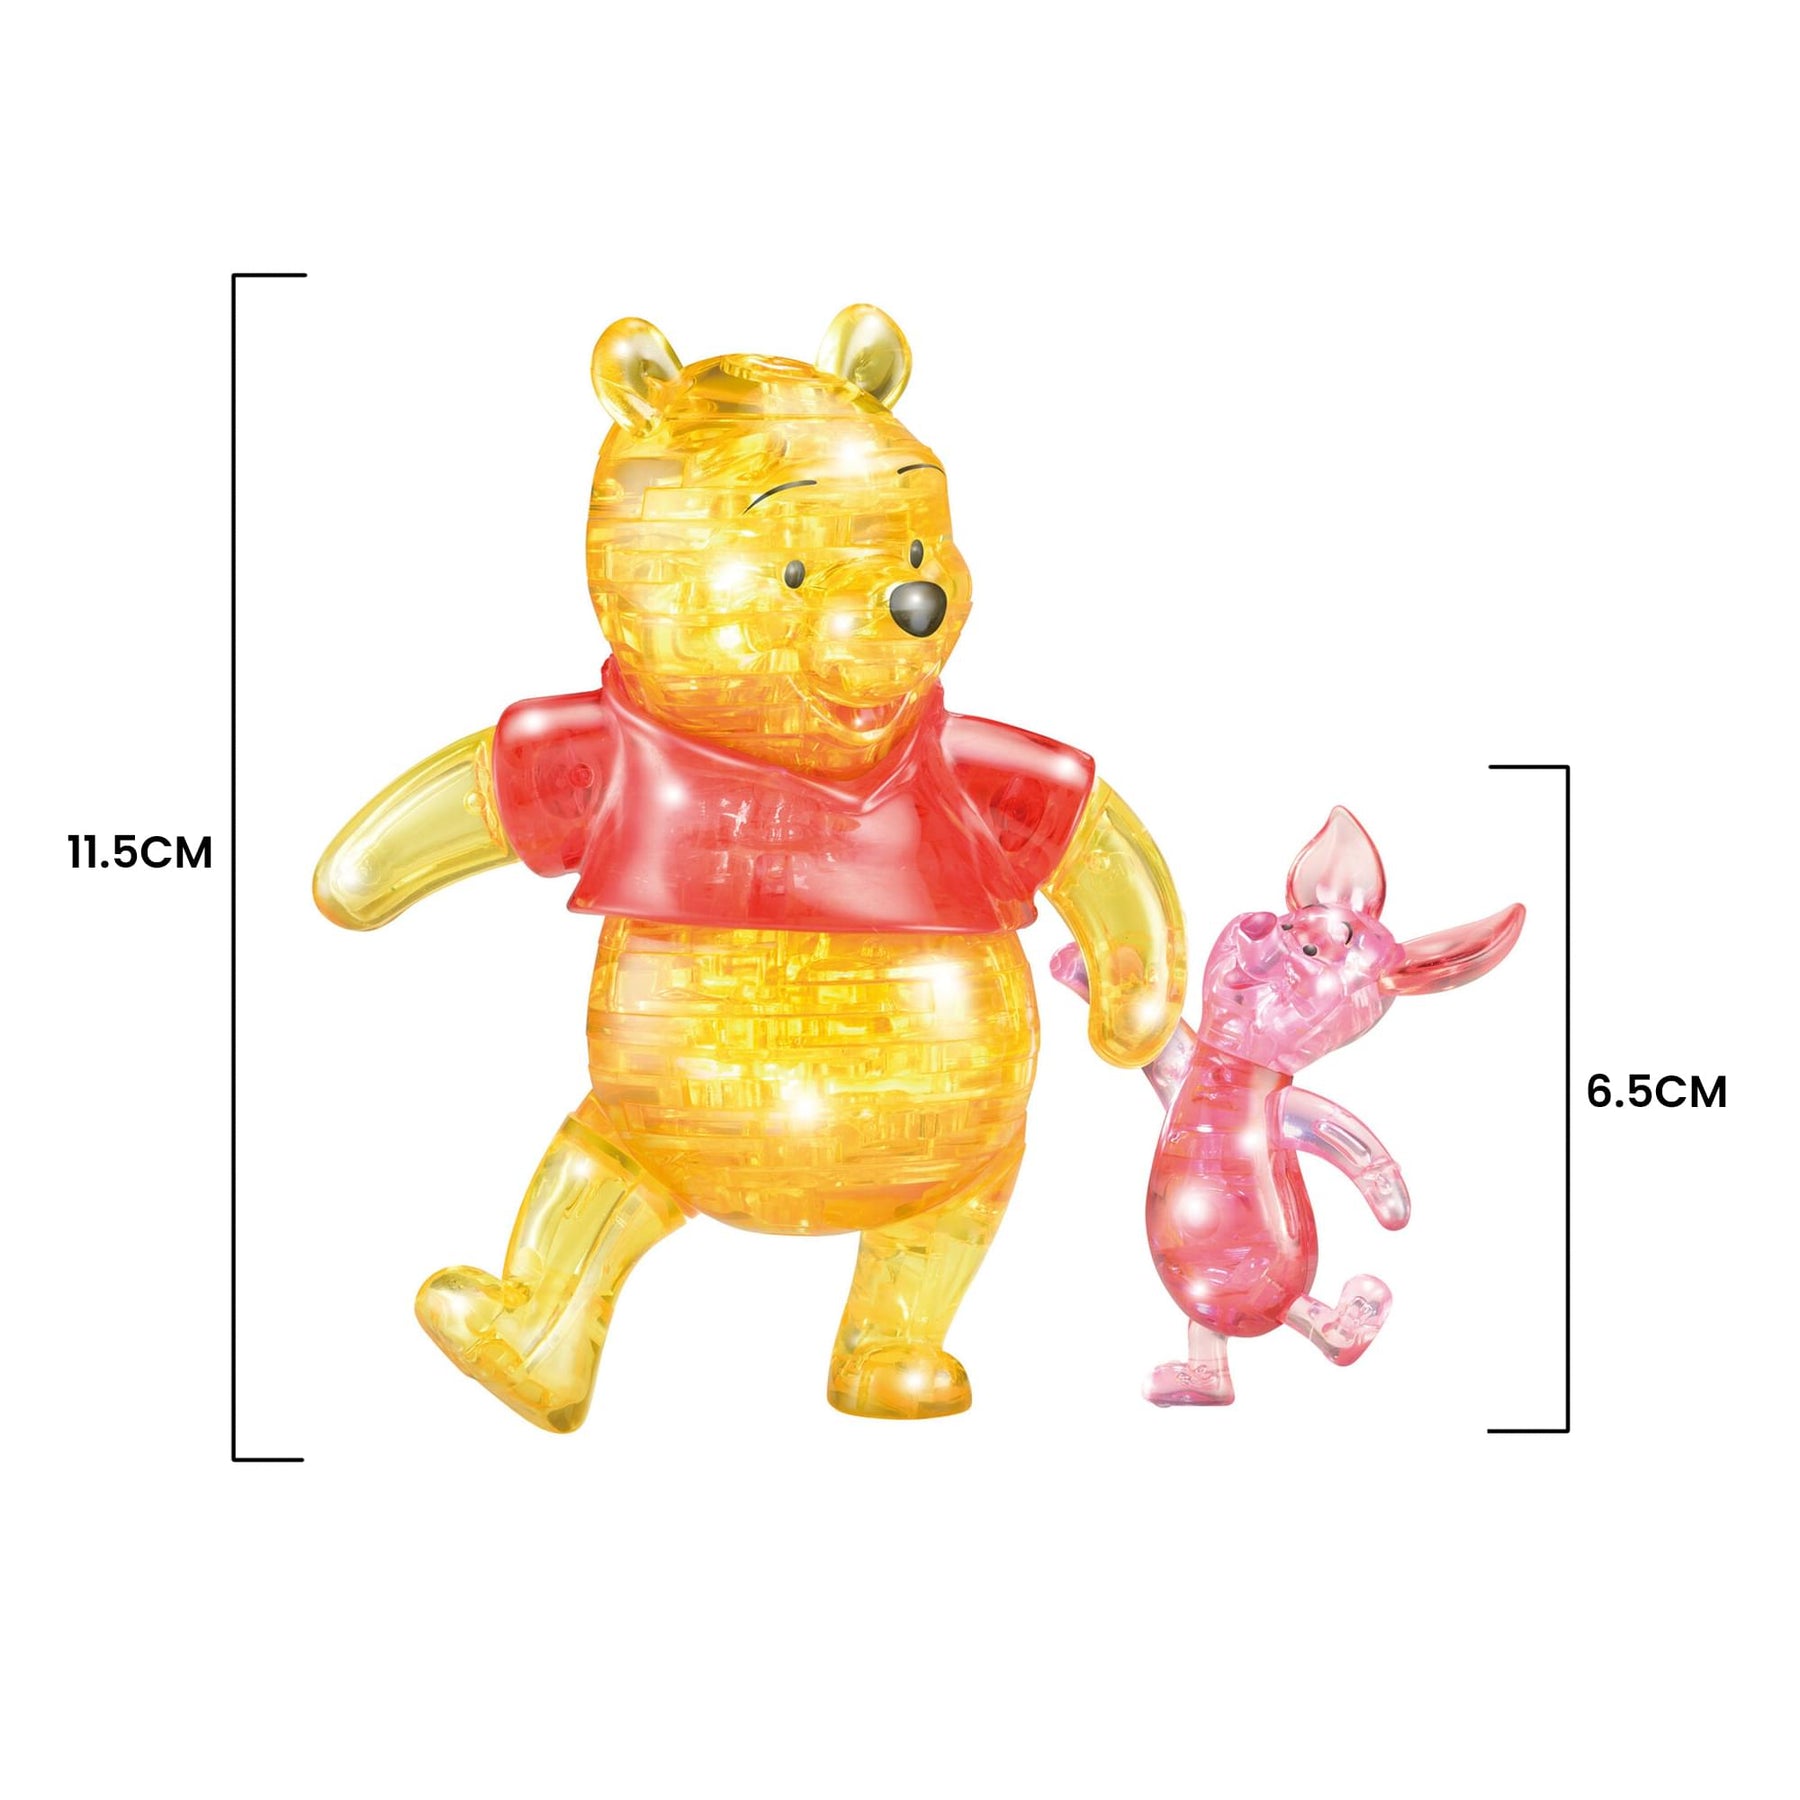 Disney Winnie the Pooh 57 Piece 3D Crystal Puzzle | Pooh and Piglet